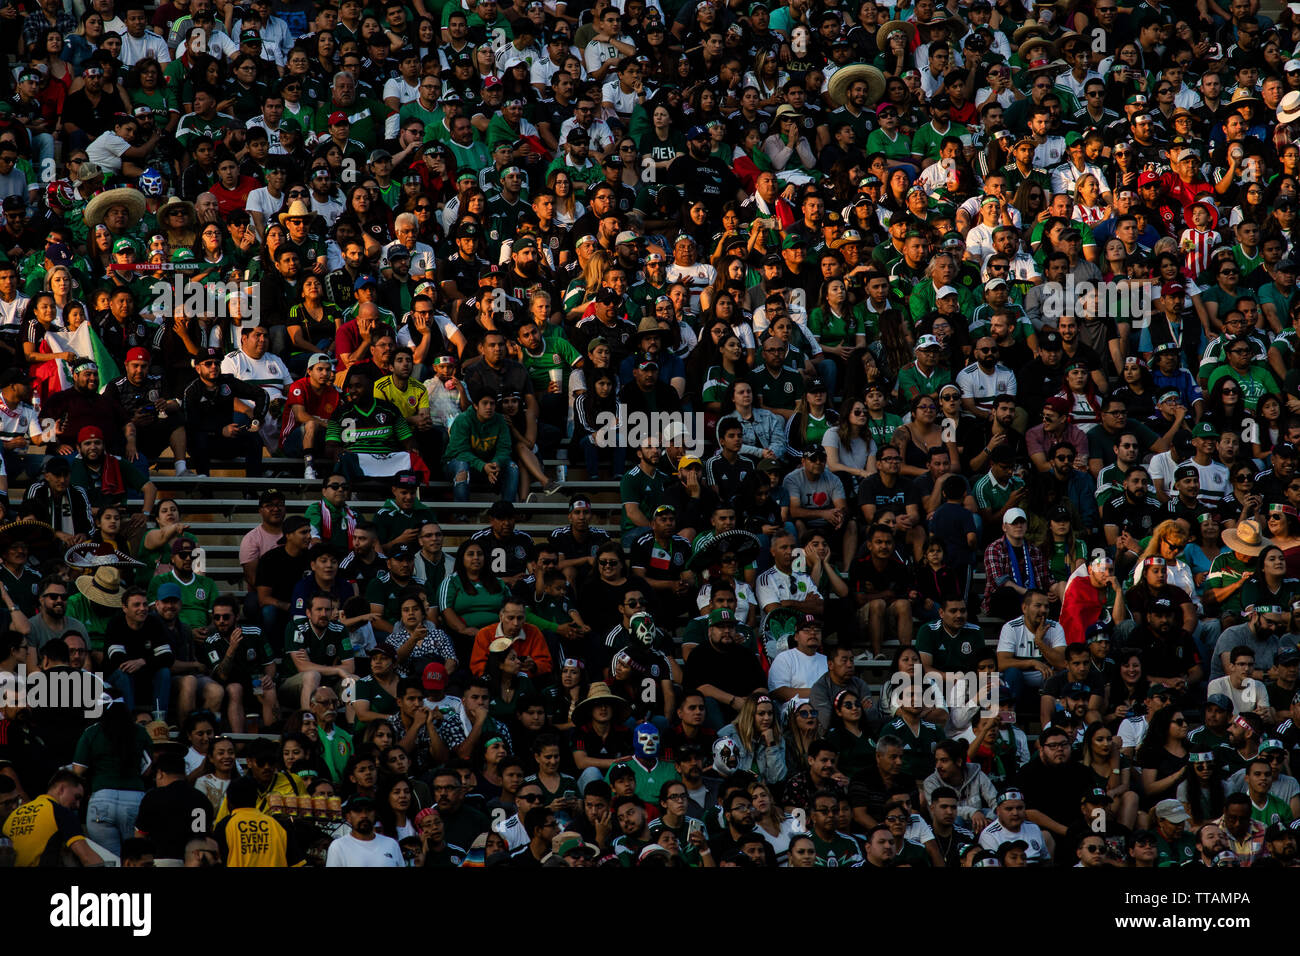 Pasadena, USA. 15th June, 2019. Over 65,000 fans came out to watch Mexico vs Cuba for the CONCACAF Gold Cup at the Rose Bowl. Credit: Ben Nichols/Alamy Live News Stock Photo